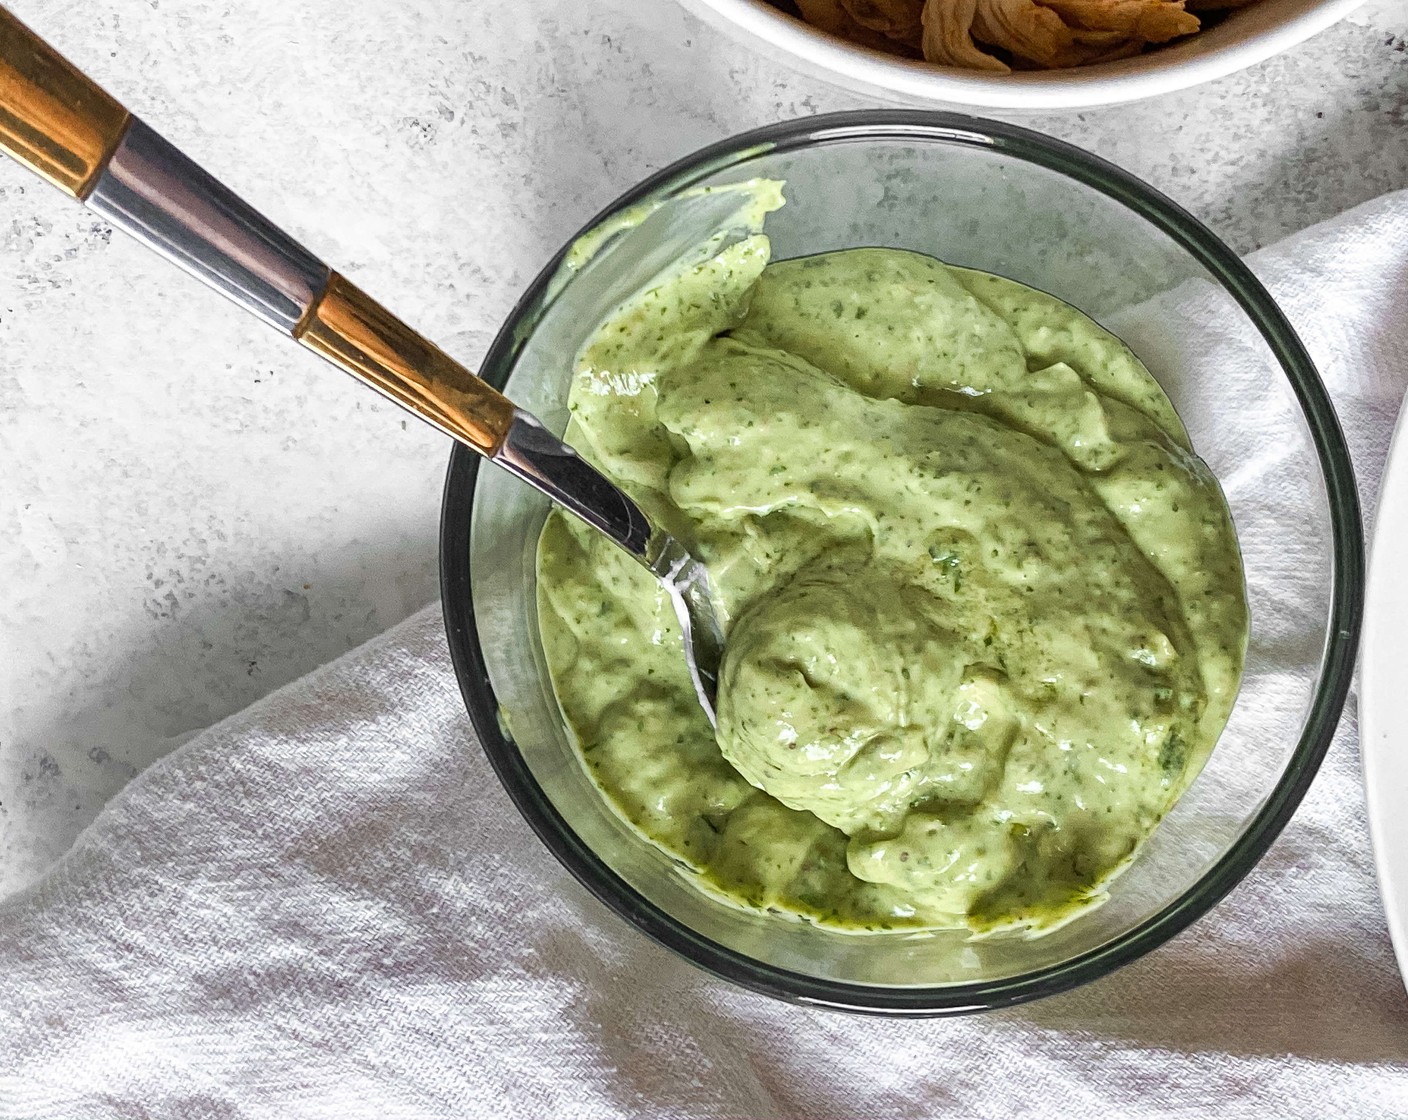 step 3 Combine the Avocado (1/2), Yogurt (1/4 cup), Fresh Cilantro (1/4 cup), Lime (1/2), Salt (to taste), and Ground Black Pepper (to taste) in a food processor and pulse until smooth.